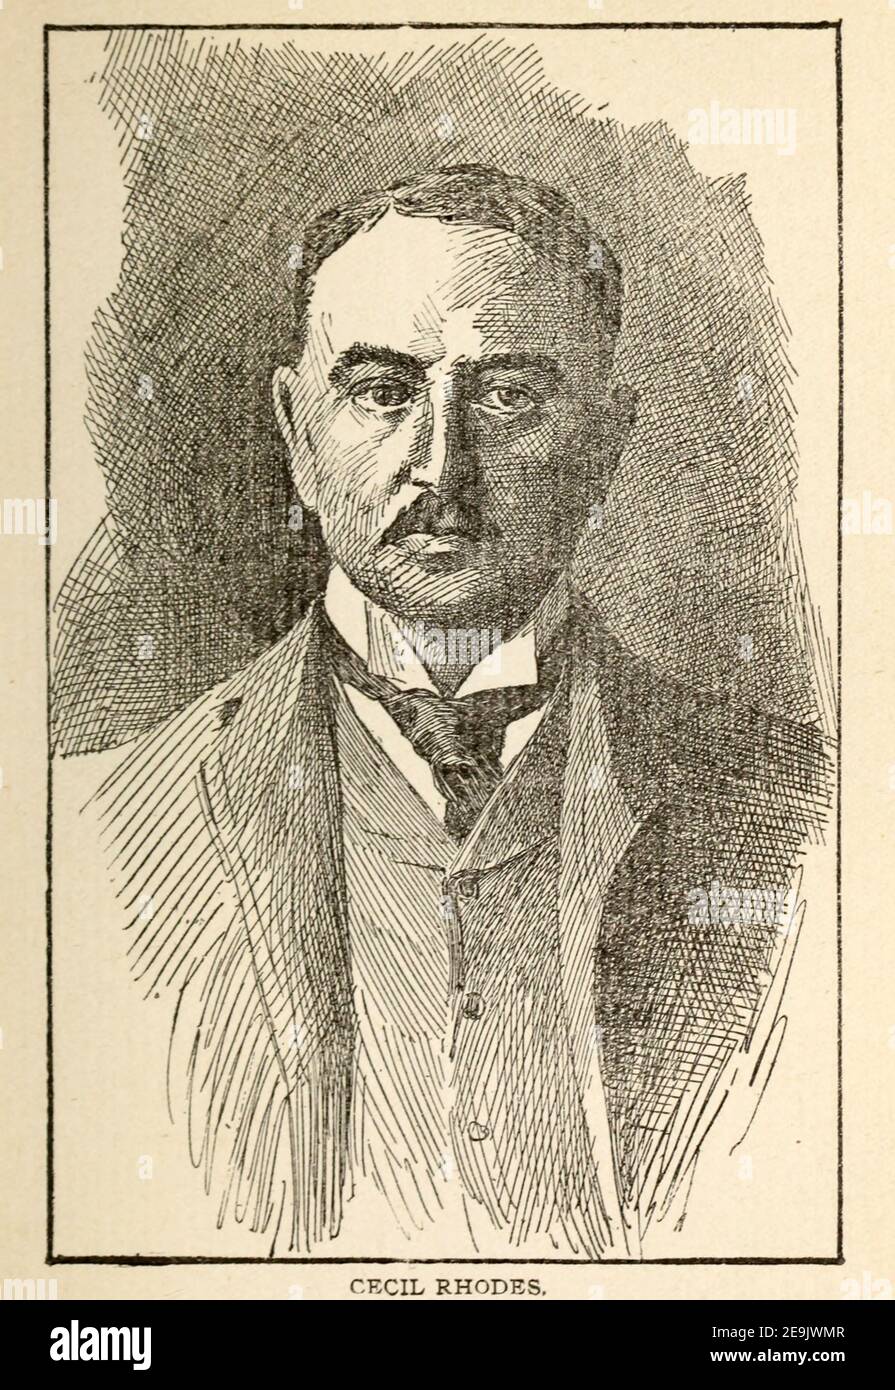 Cecil John Rhodes PC (5 July 1853 – 26 March 1902) was a British mining  magnate and politician in southern Africa who served as Prime Minister of  the Cape Colony from 1890